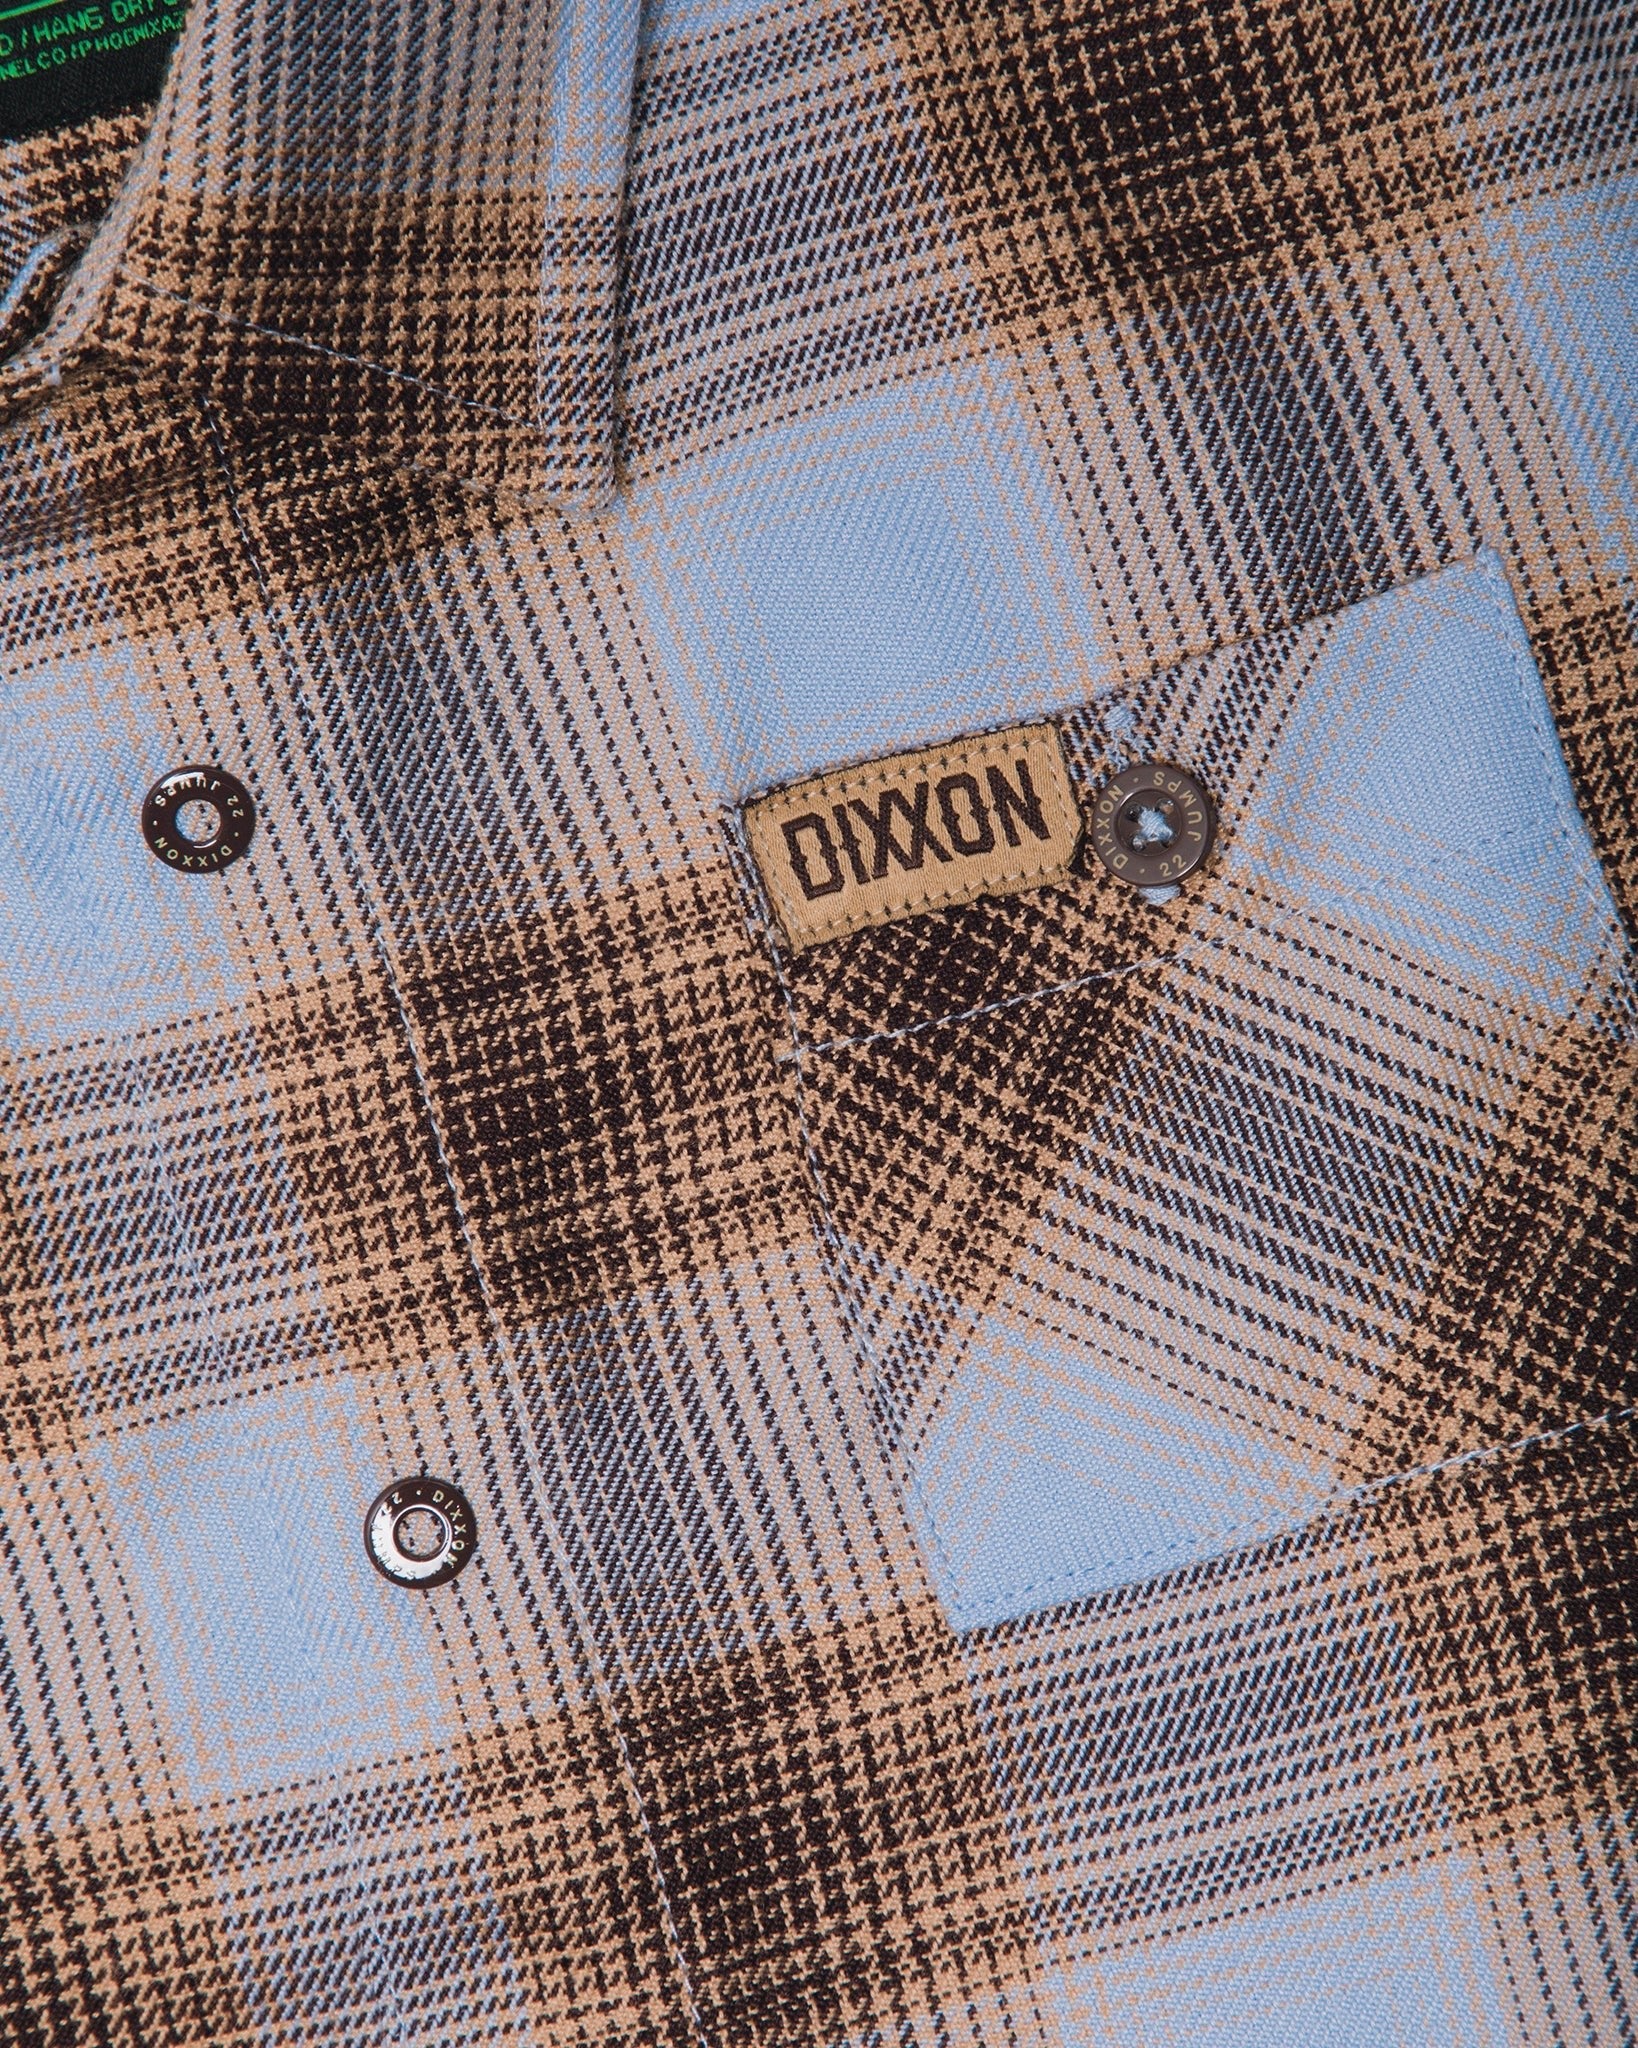 Youth 22 Jumps Twin Falls Flannel - Dixxon Flannel Co.